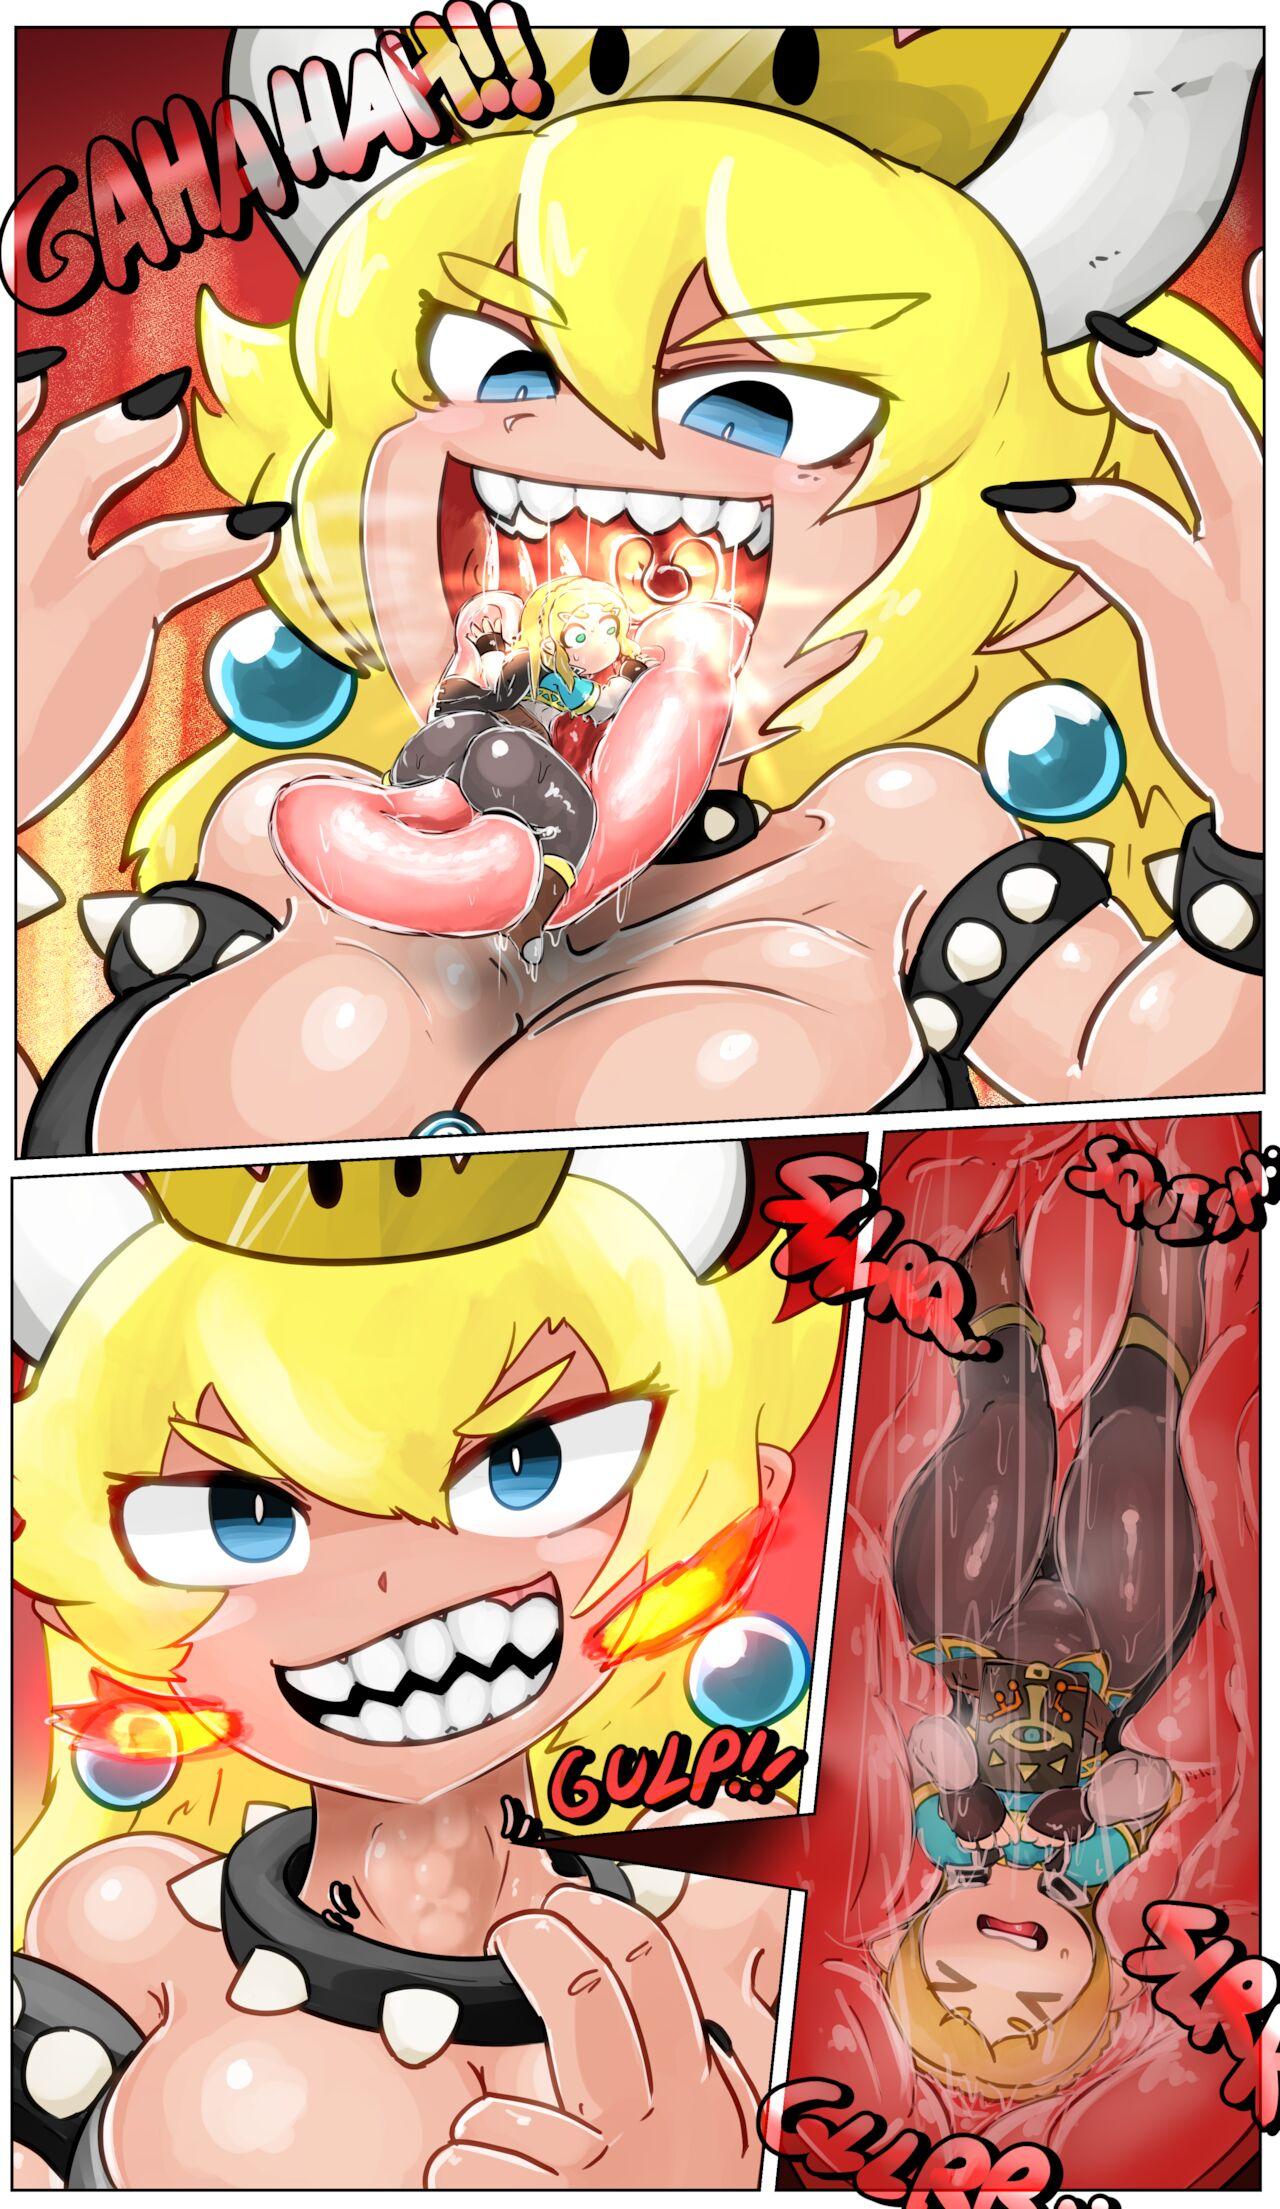 Gay Shop Bowsette Inside Story - The legend of zelda Super mario brothers | super mario bros. Home - Page 2